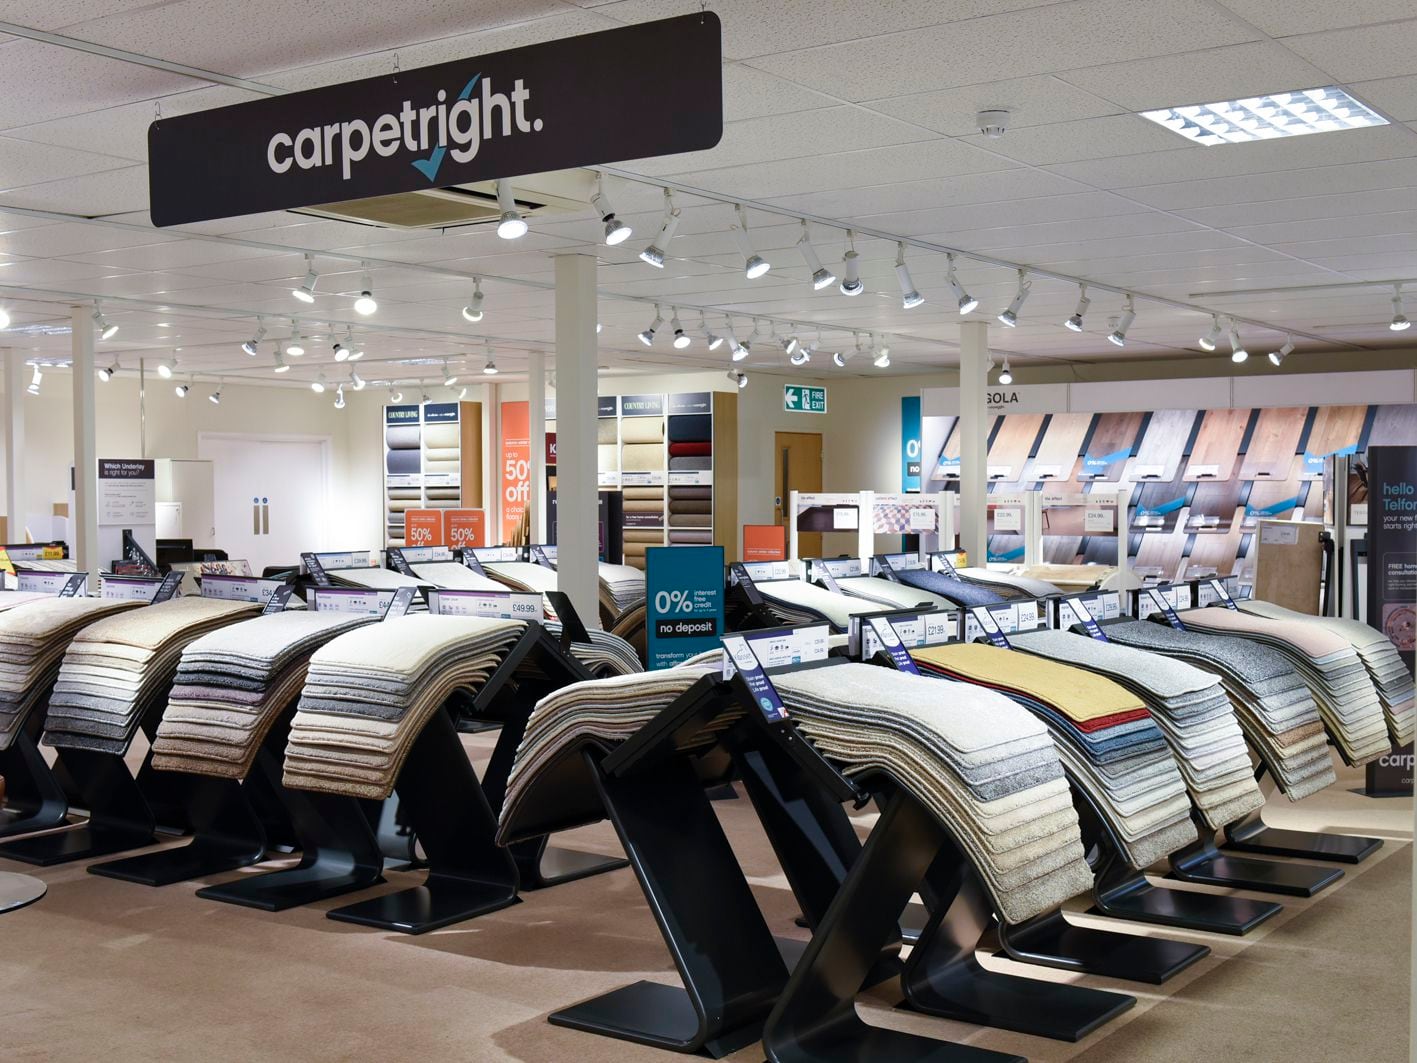 More than 200 Carpetright shops to shut after rescue deal